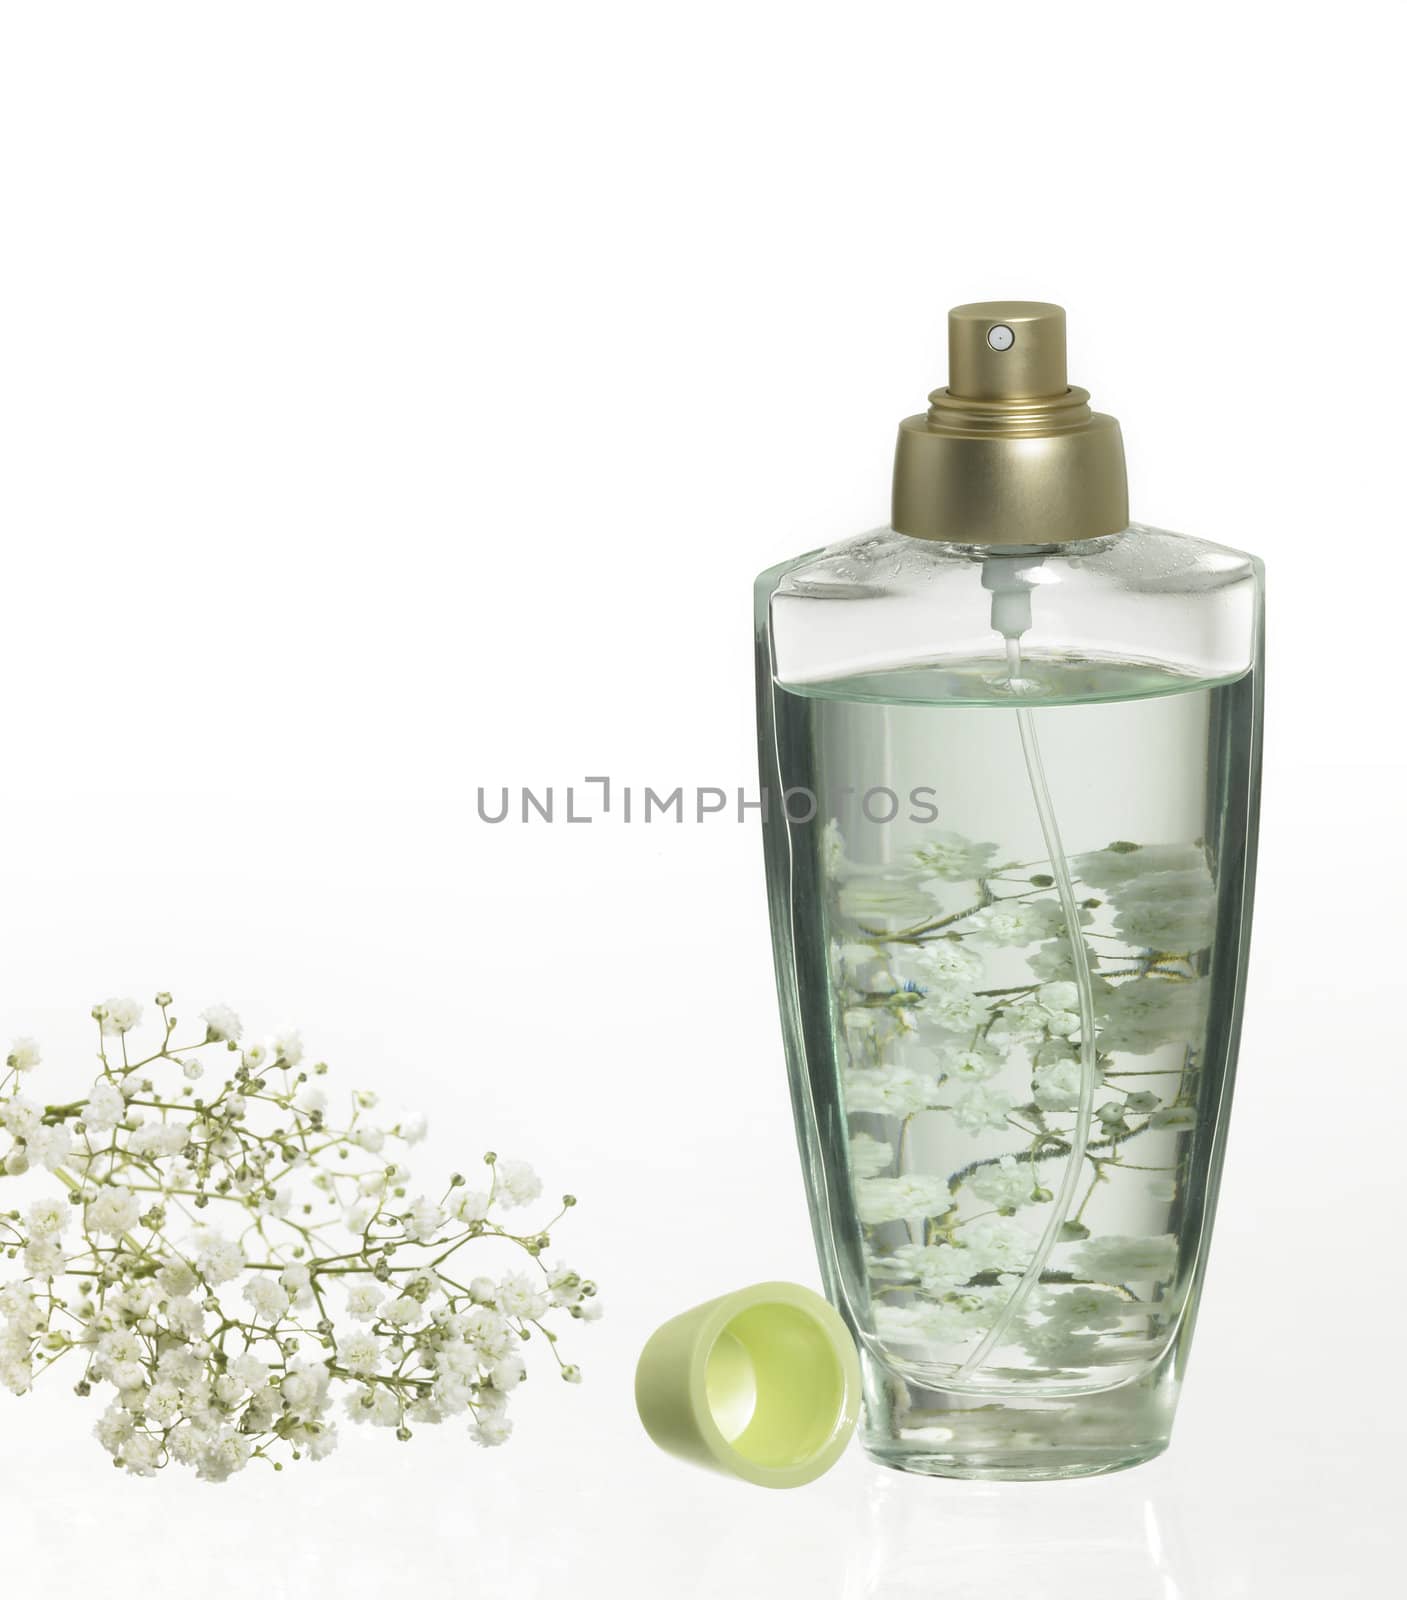 studio photography of a perfume and some floral decoration in light back